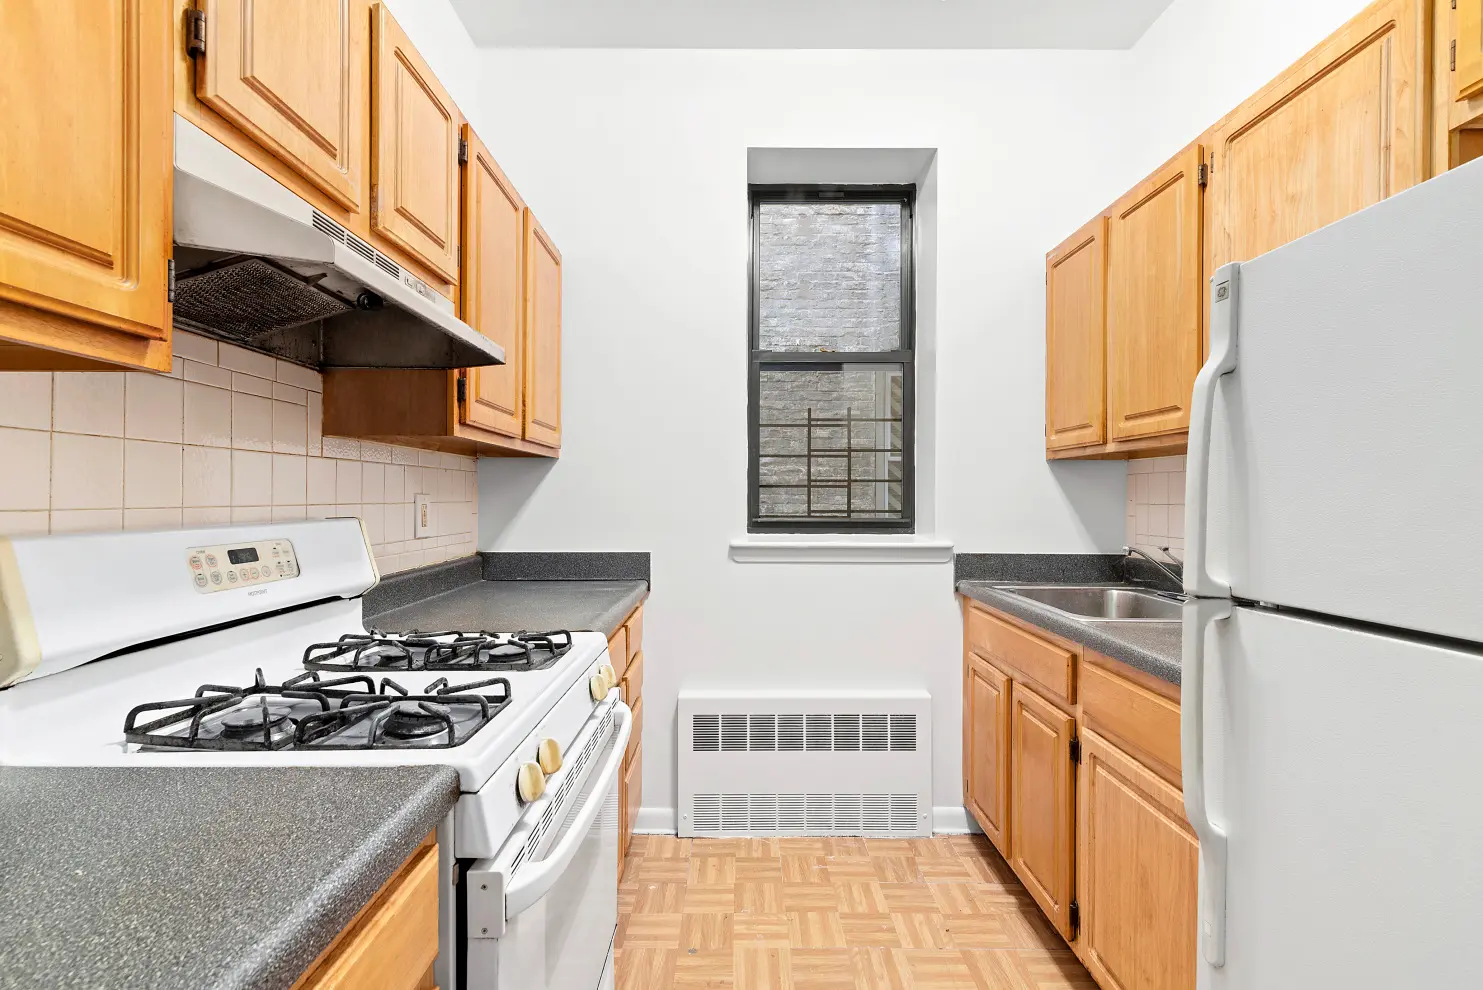 The Park View, 307 West 111th Street